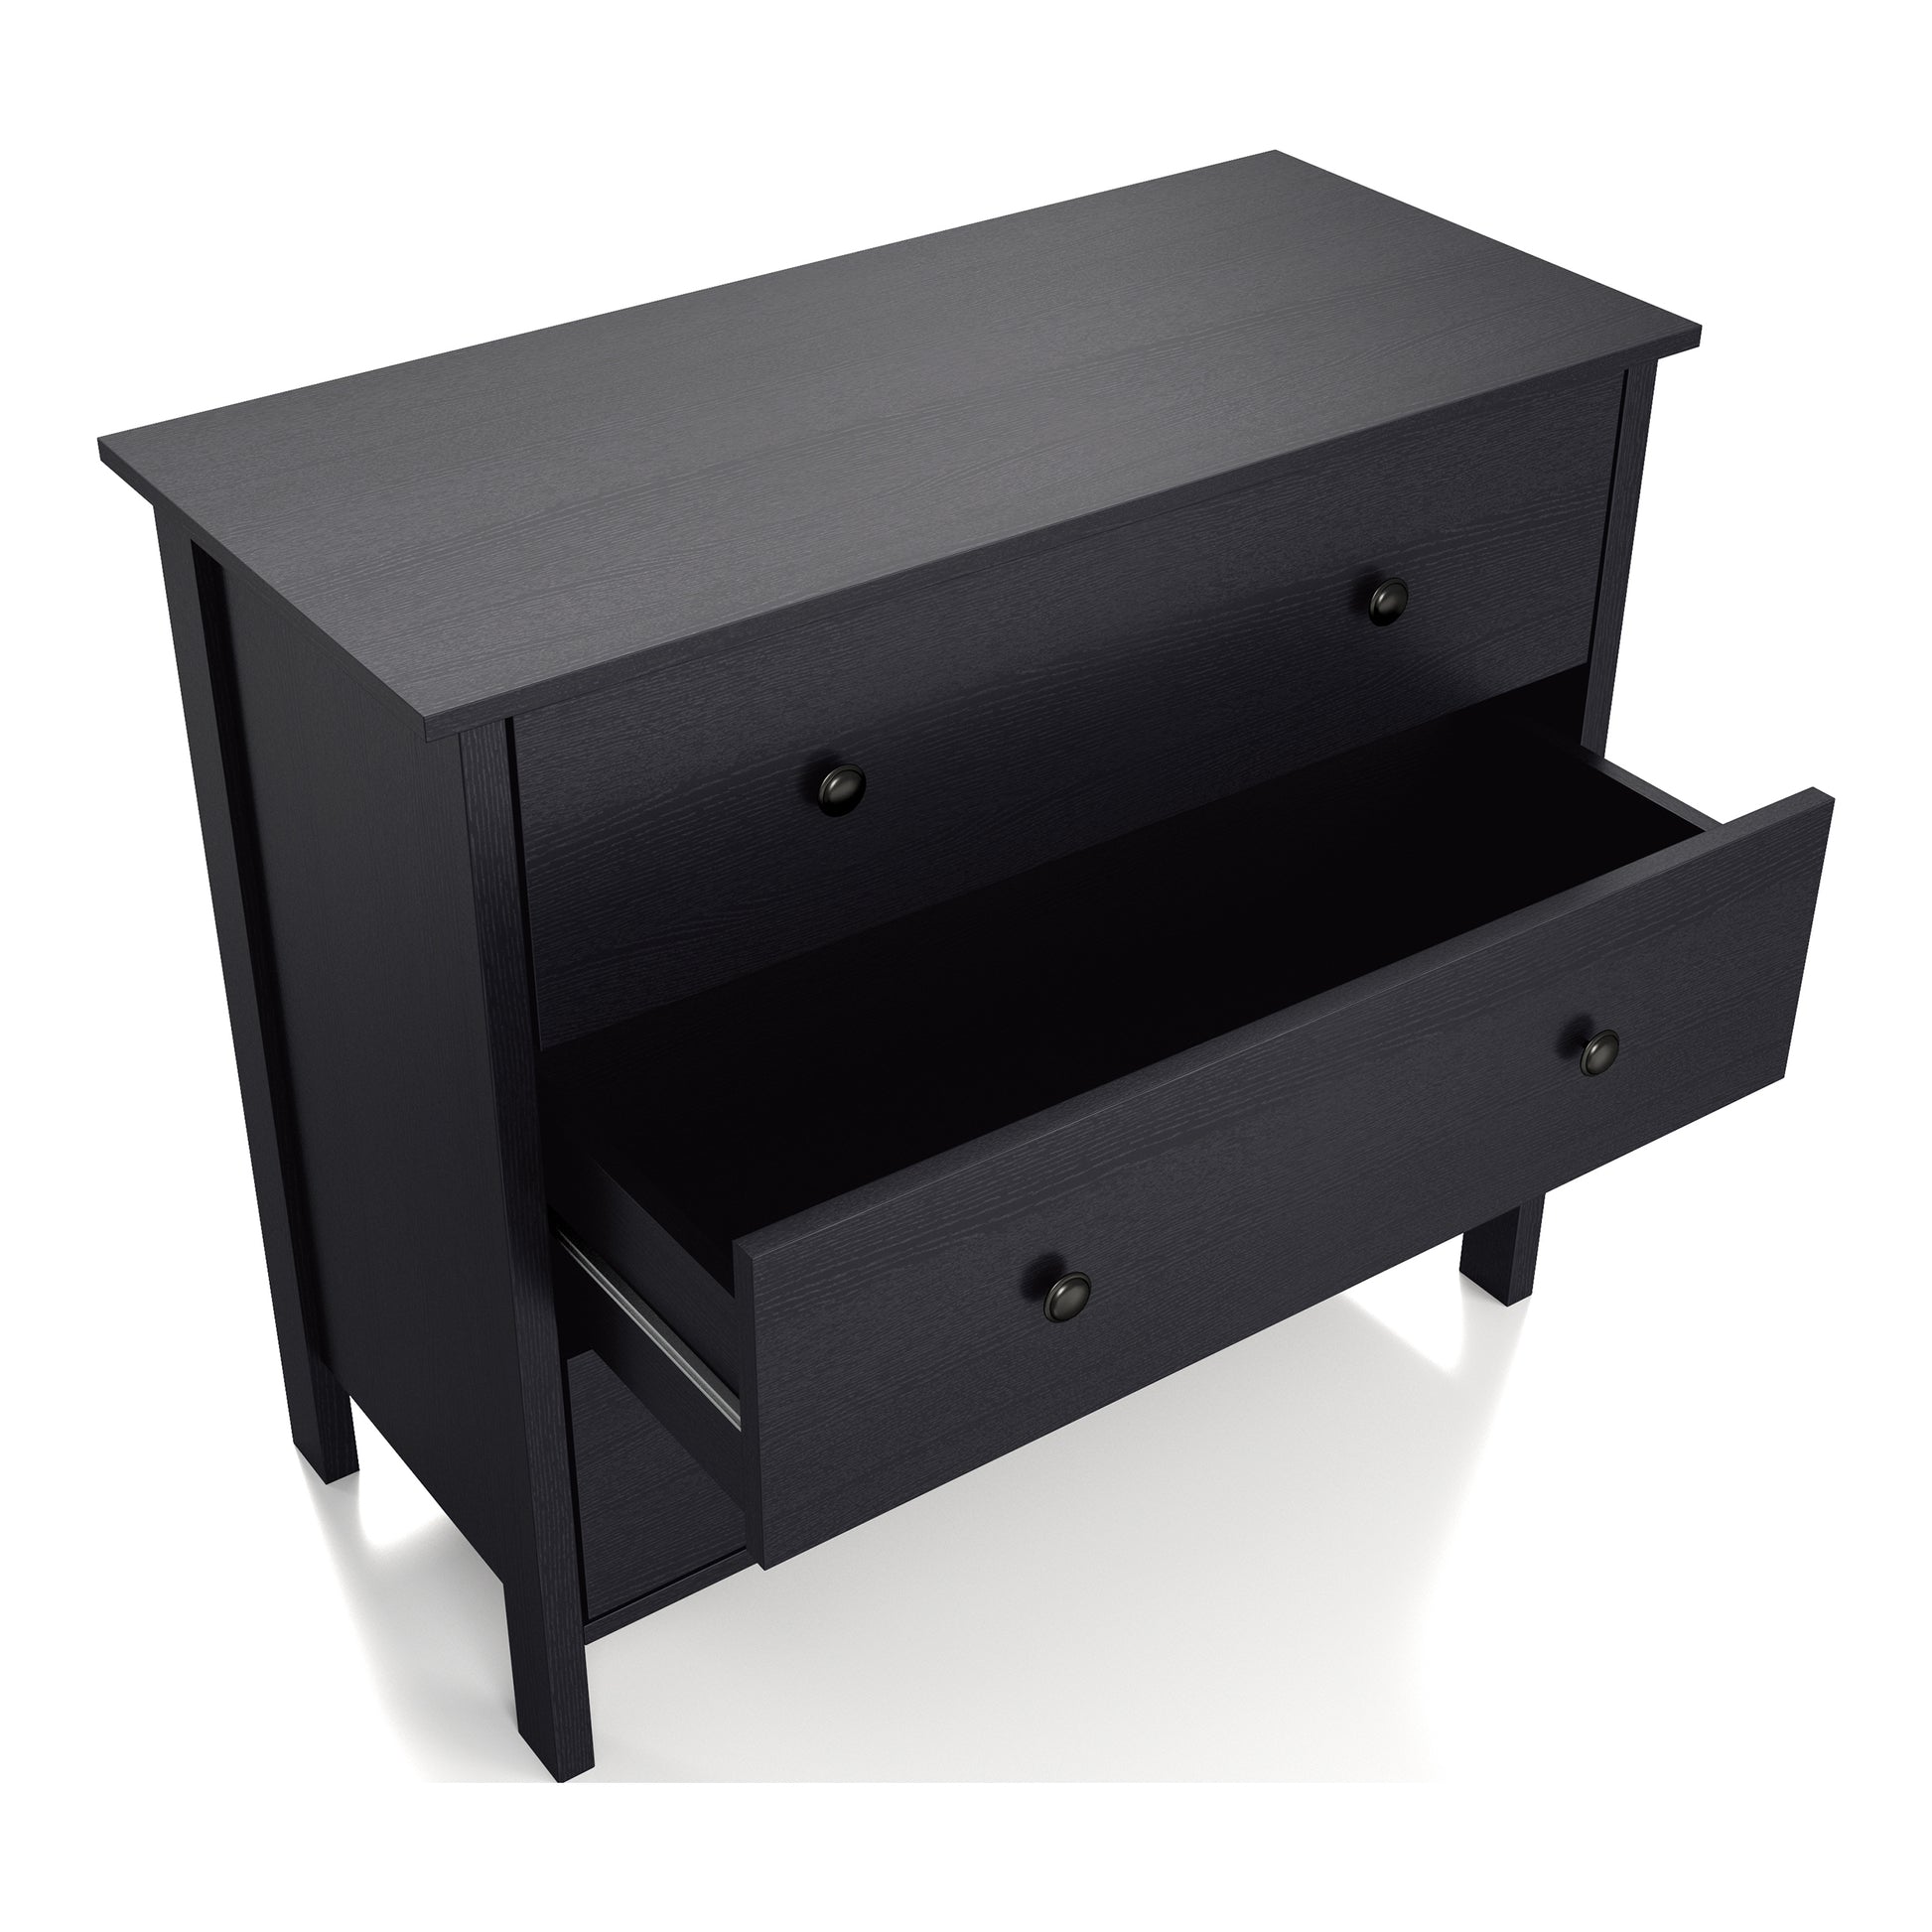 Right angled bird's eye view of a transitional black three-drawer youth dresser with middle drawer open on a white background